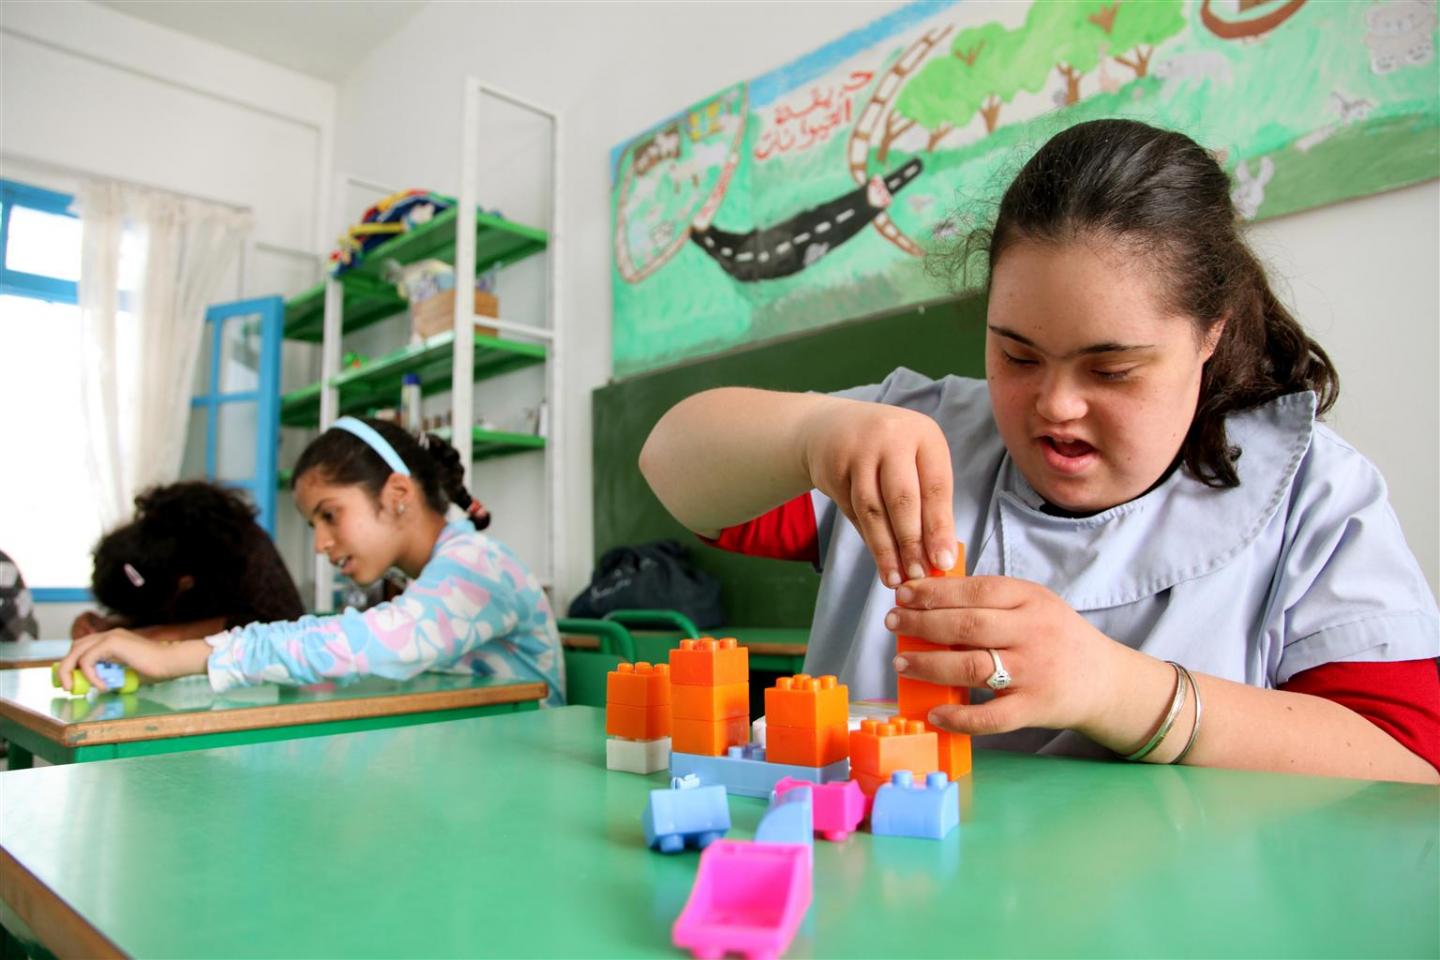 A girl who has Down’s syndrome plays with building blocks